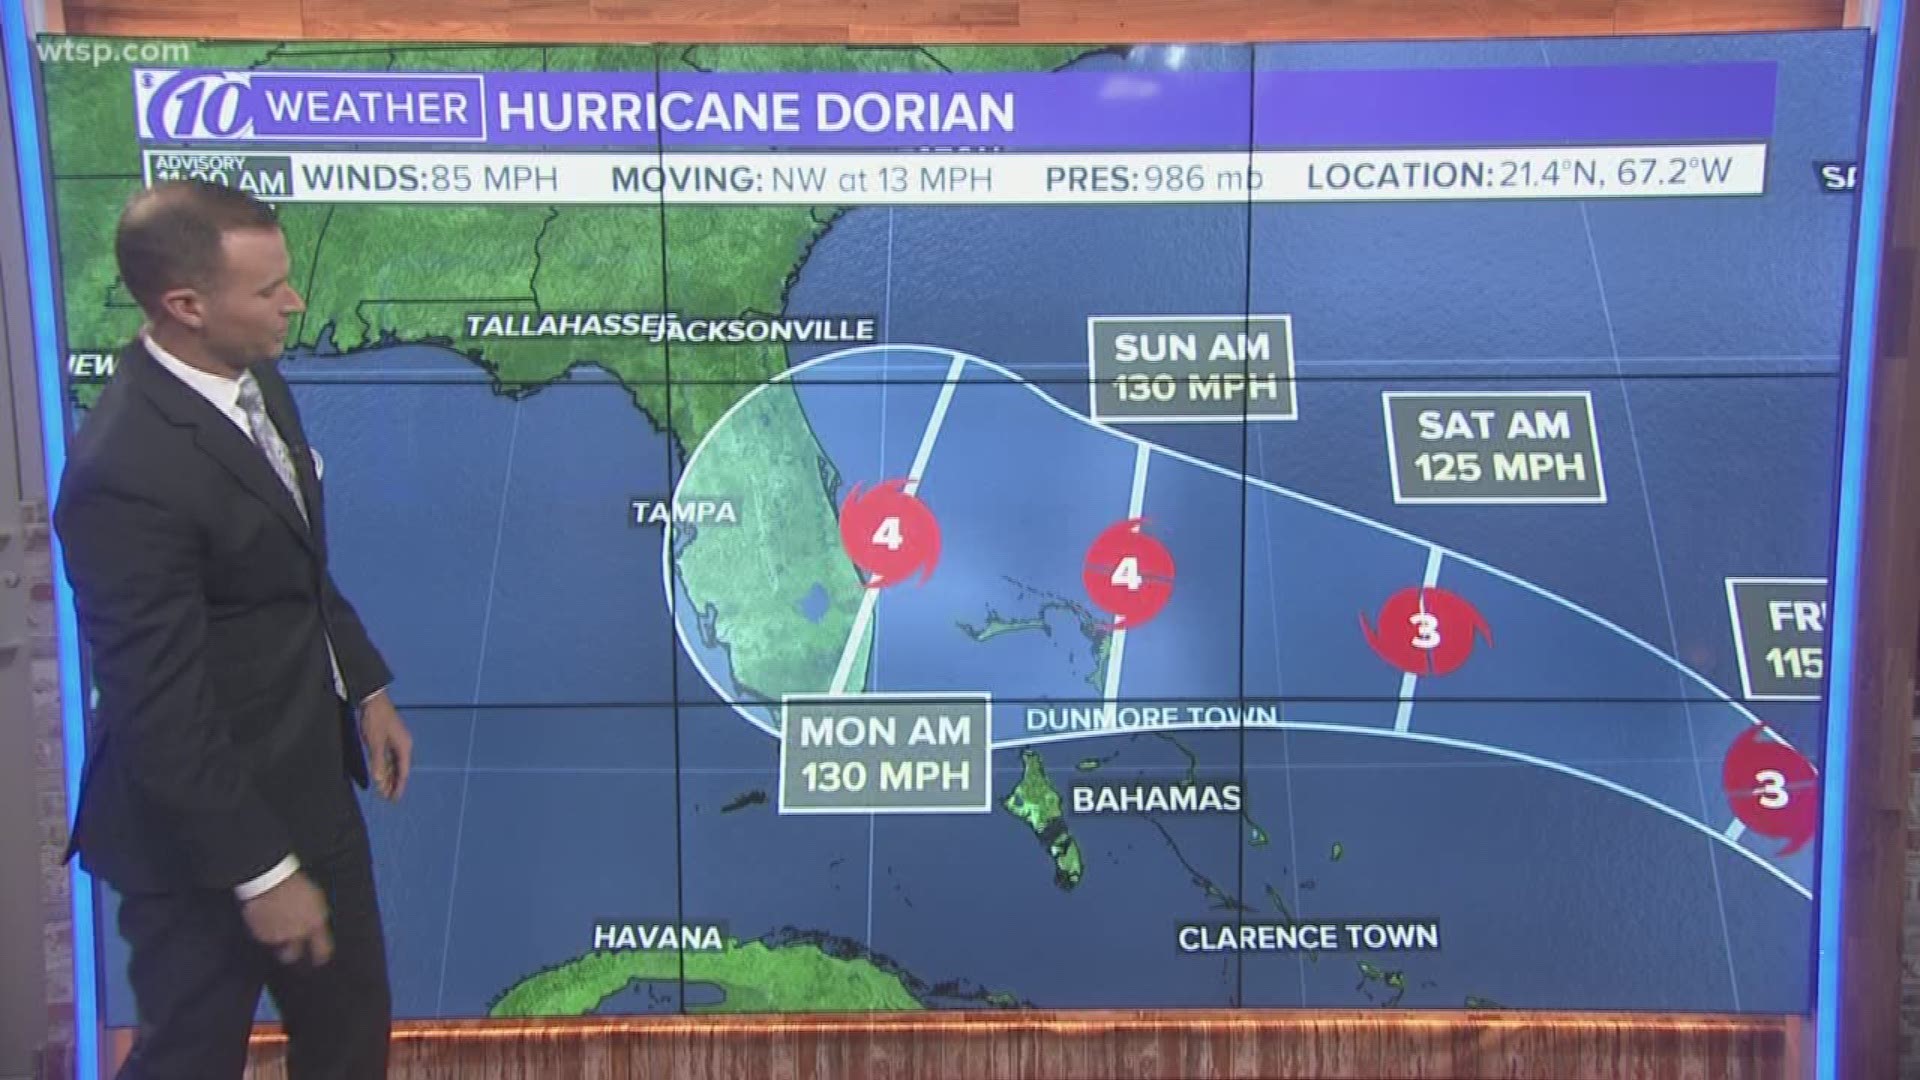 It's likely Dorian will become a Category 4 hurricane by the time it reaches Florida or the southeastern United States. https://on.wtsp.com/2MLDGew